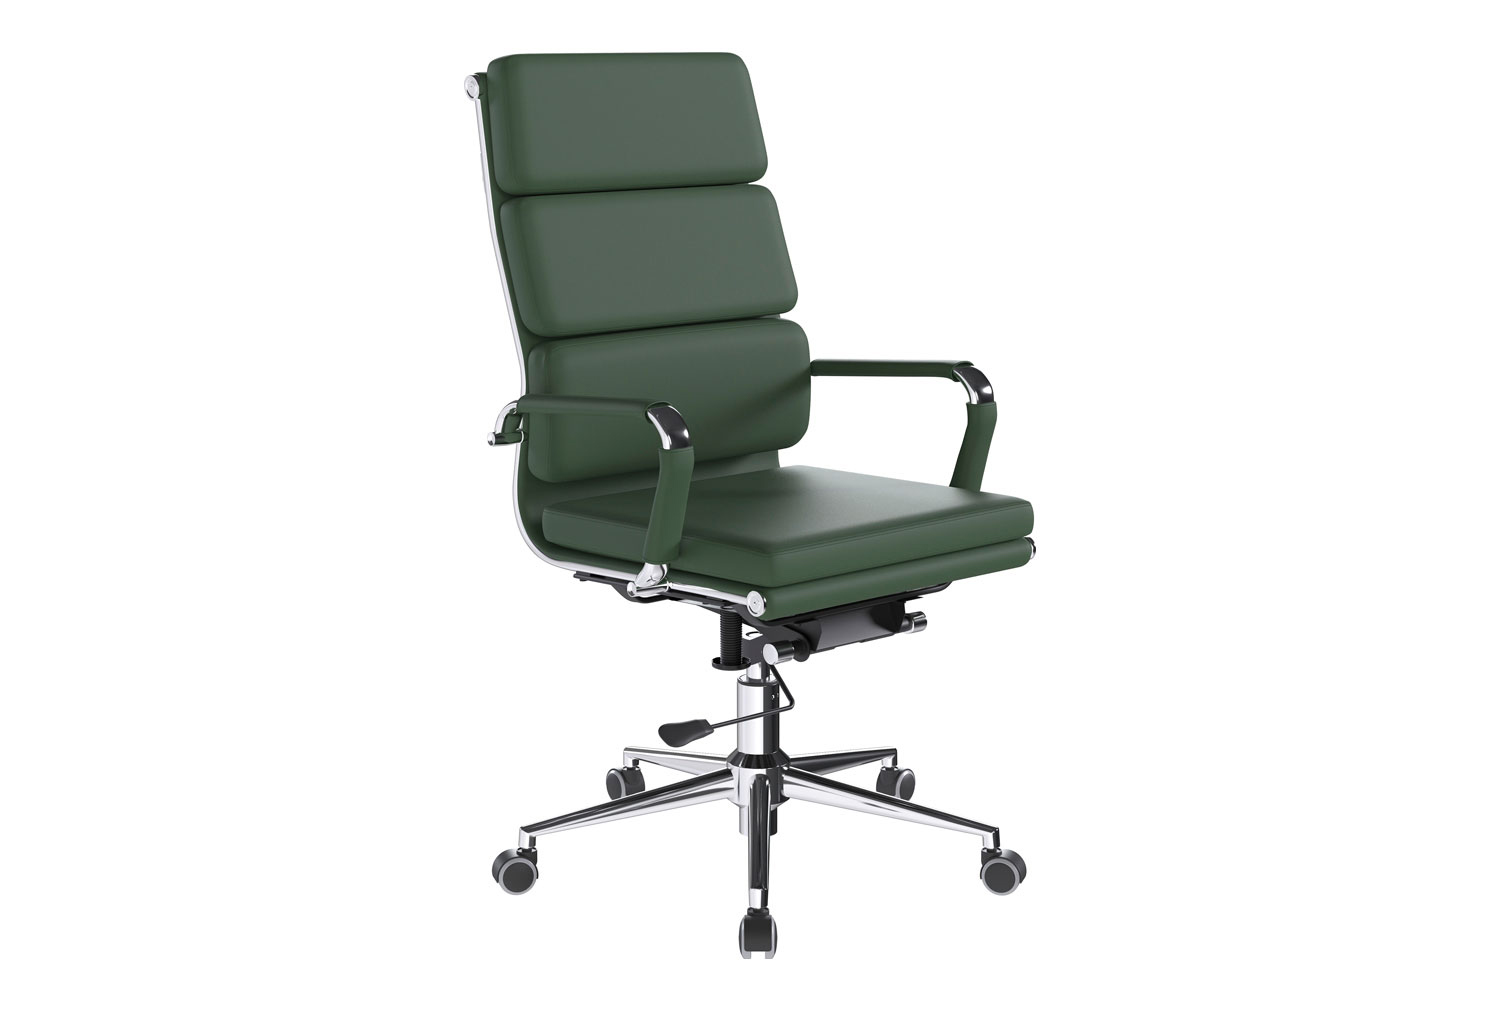 Farrell Bonded Leather Executive Office Chair (Forrest Green), Fully Installed